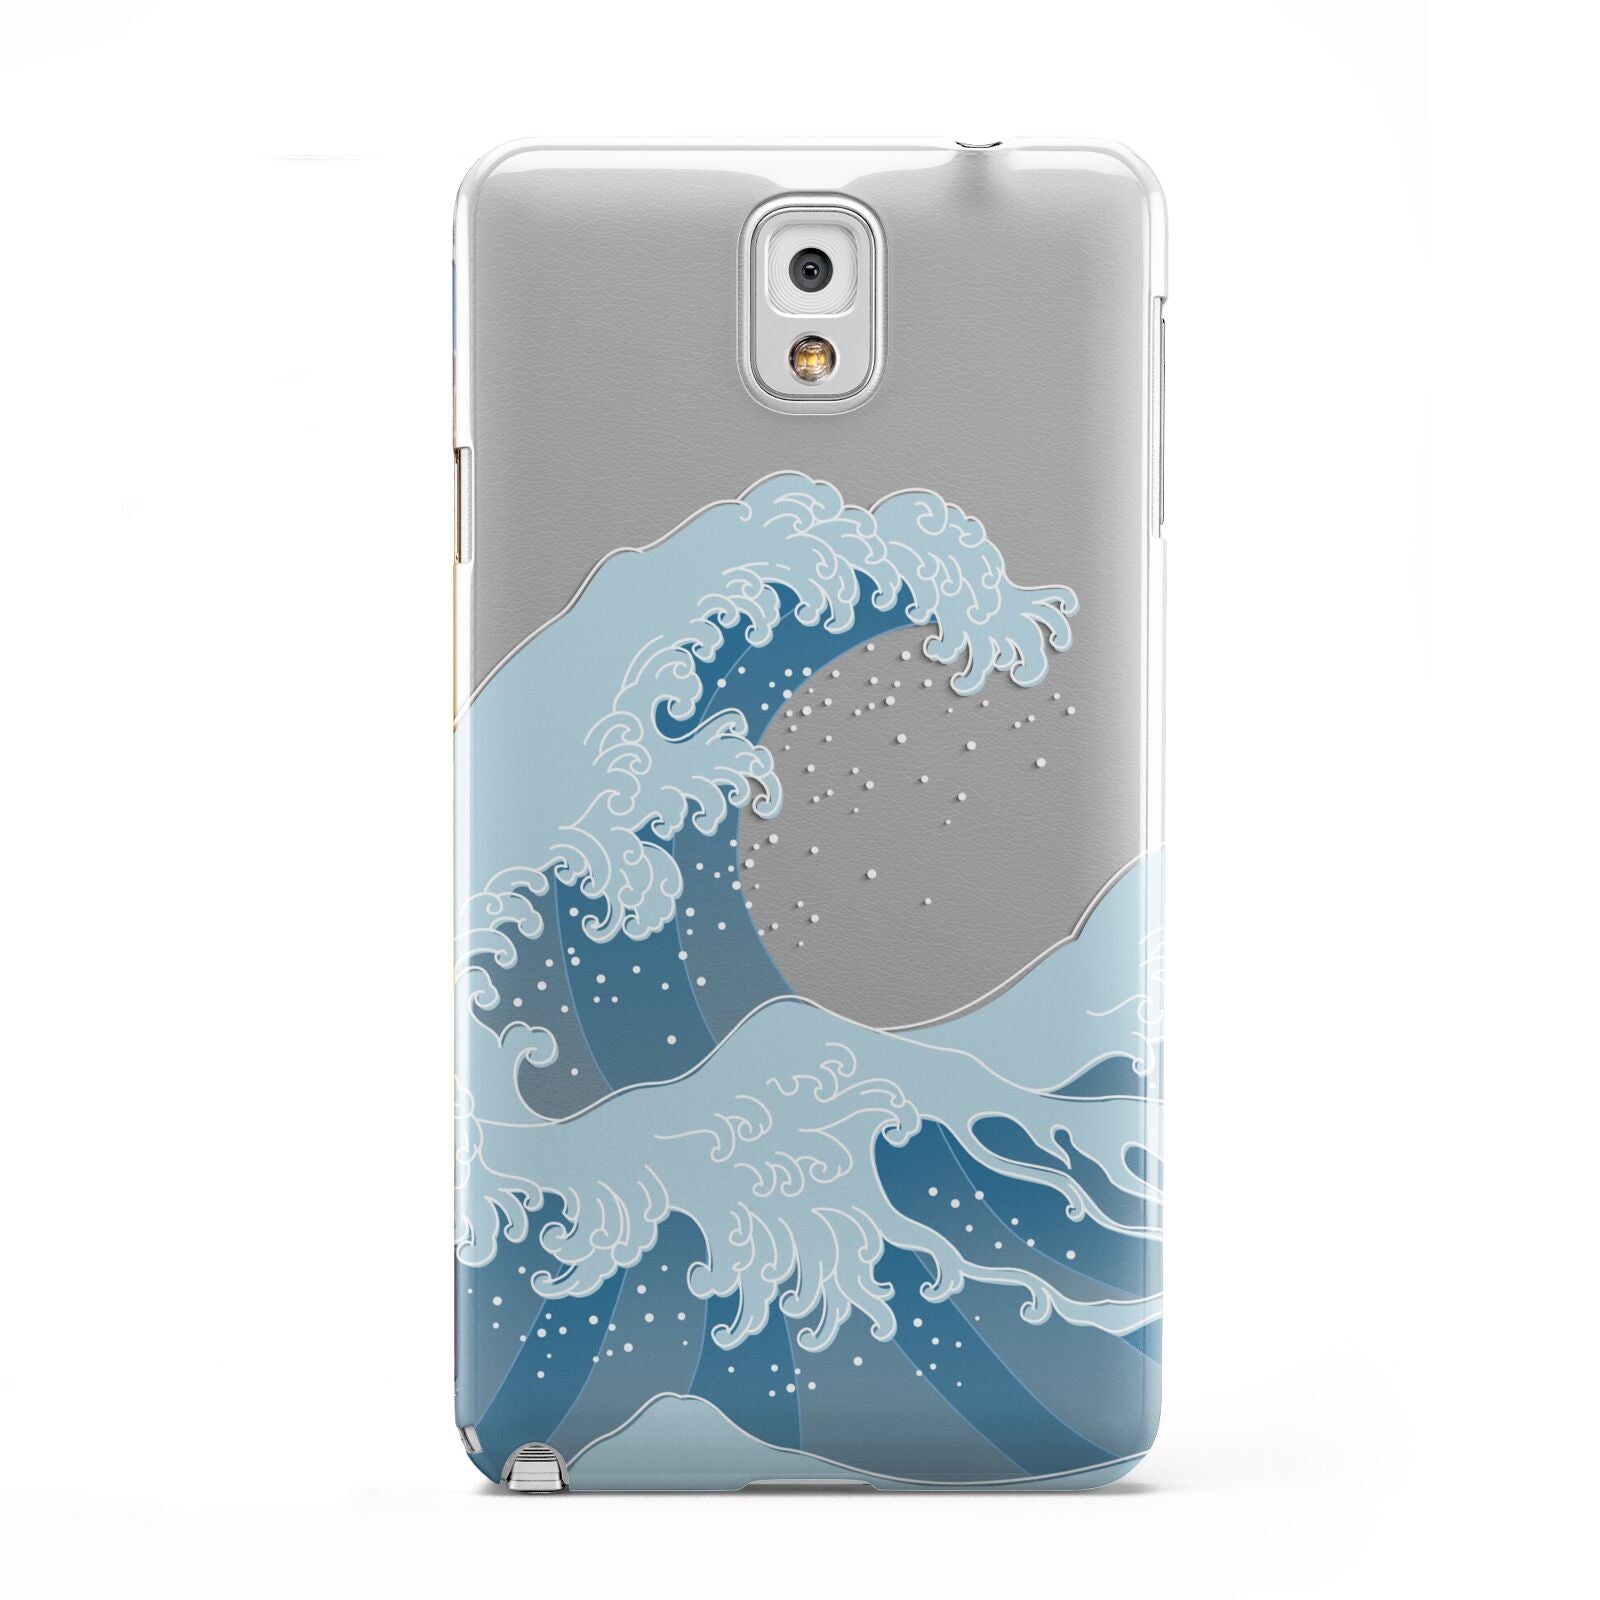 Great Wave Illustration Samsung Galaxy Note 3 Case